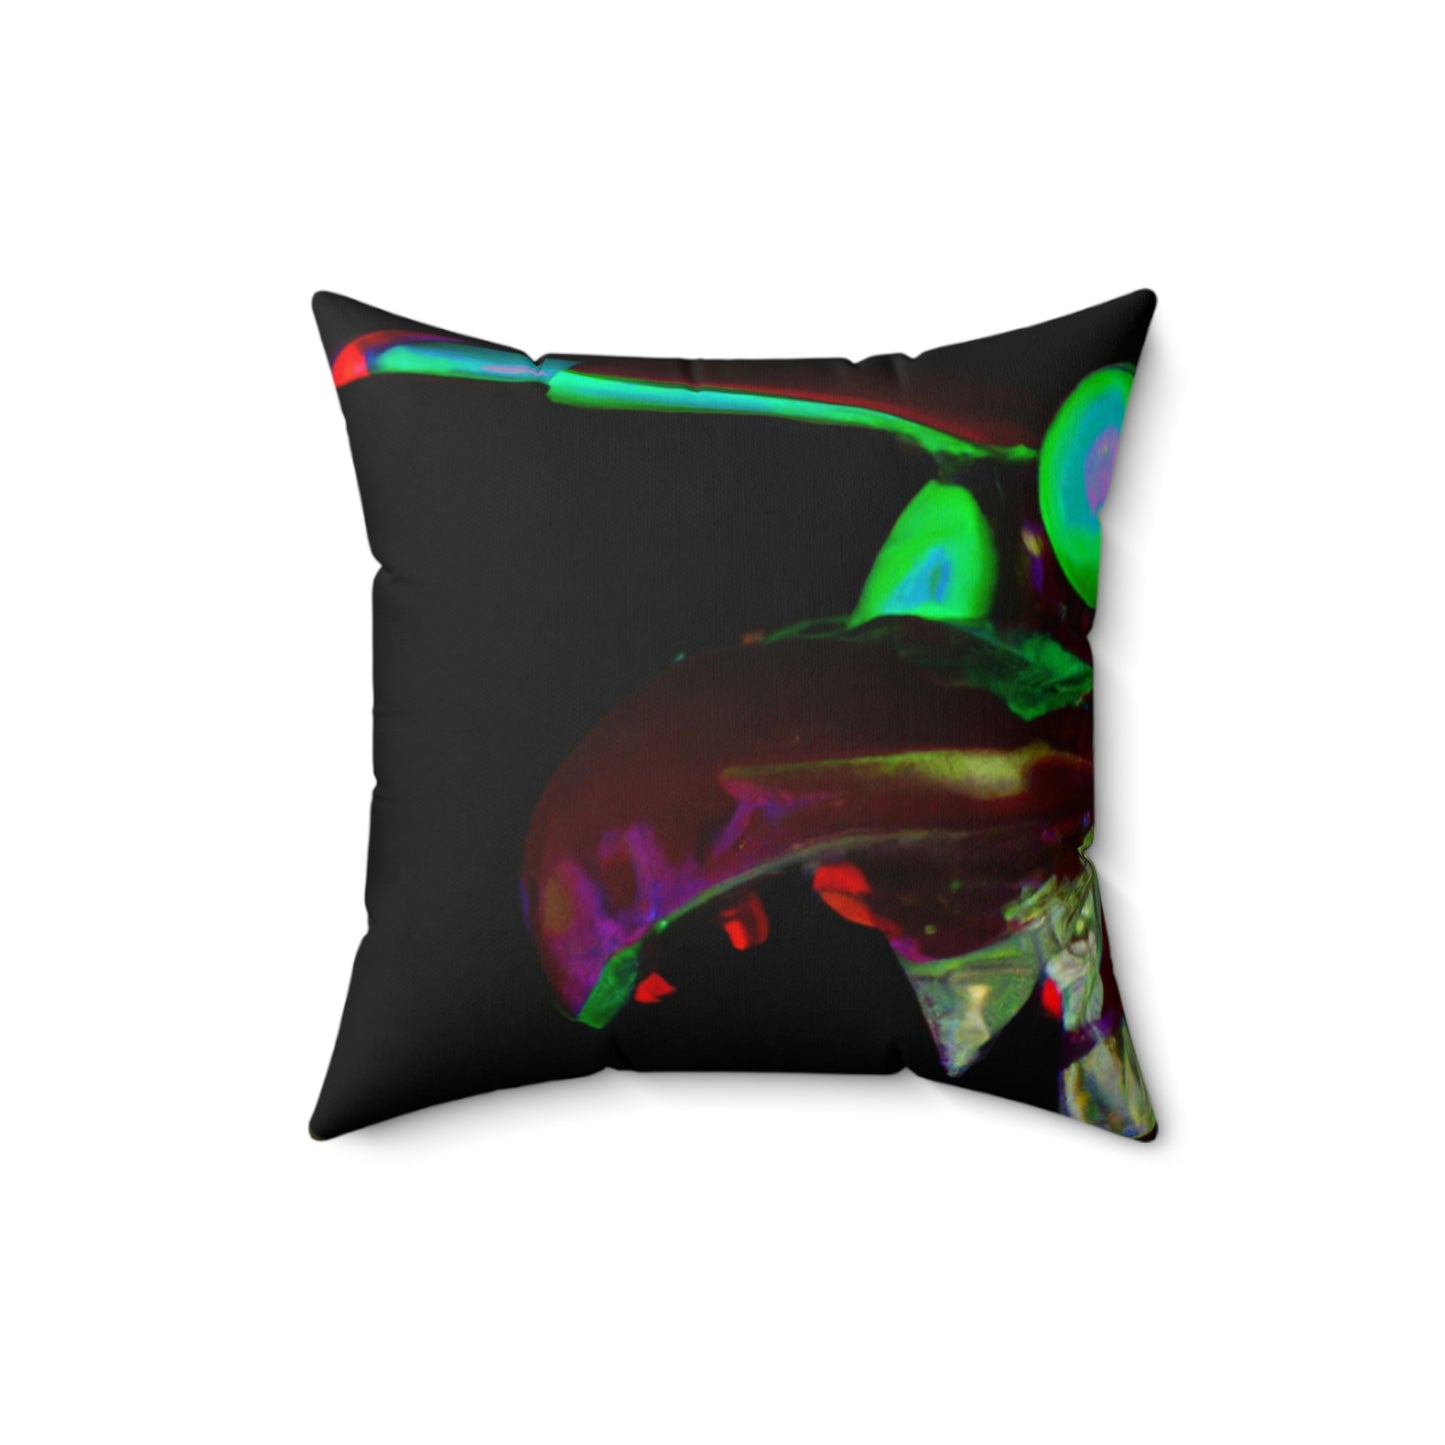 "Carnivale of the Damned" - The Alien Square Pillow